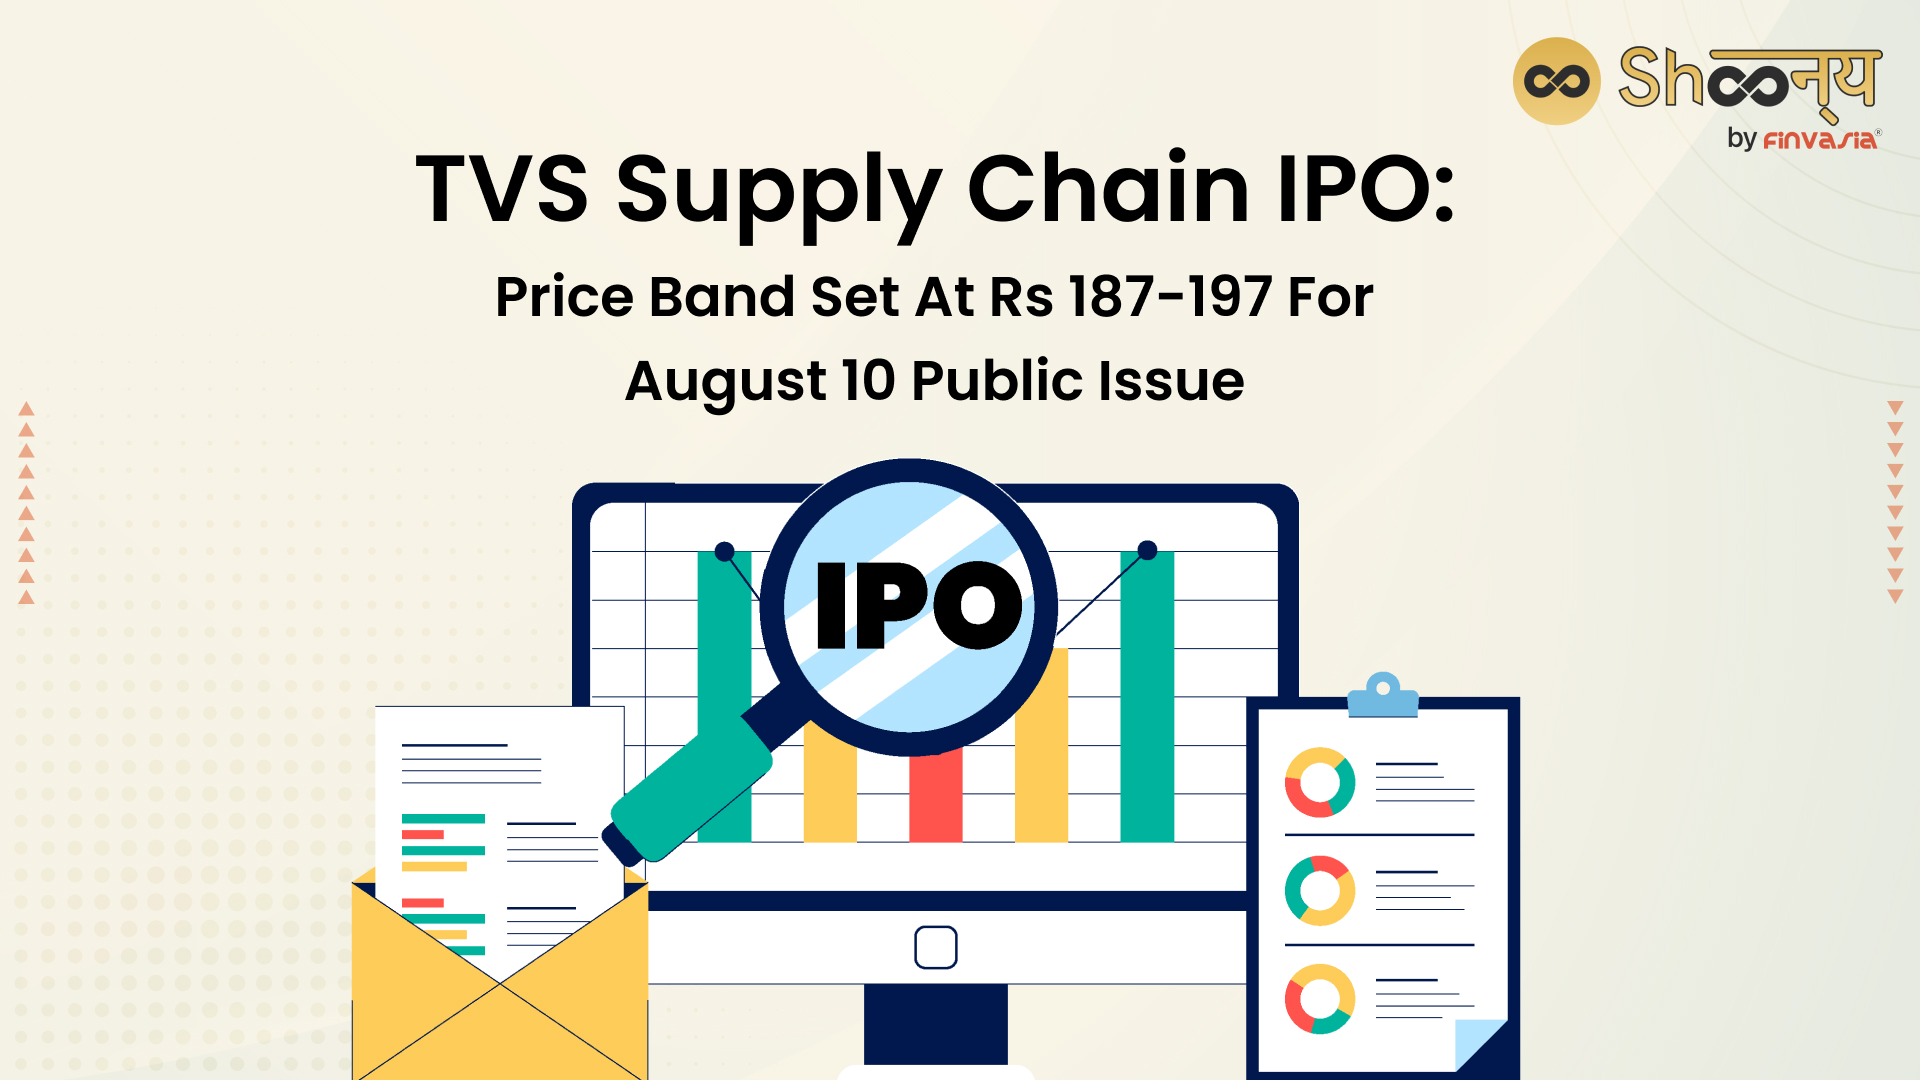 TVS Supply Chain Sets Price Band for IPO at Rs 187-197